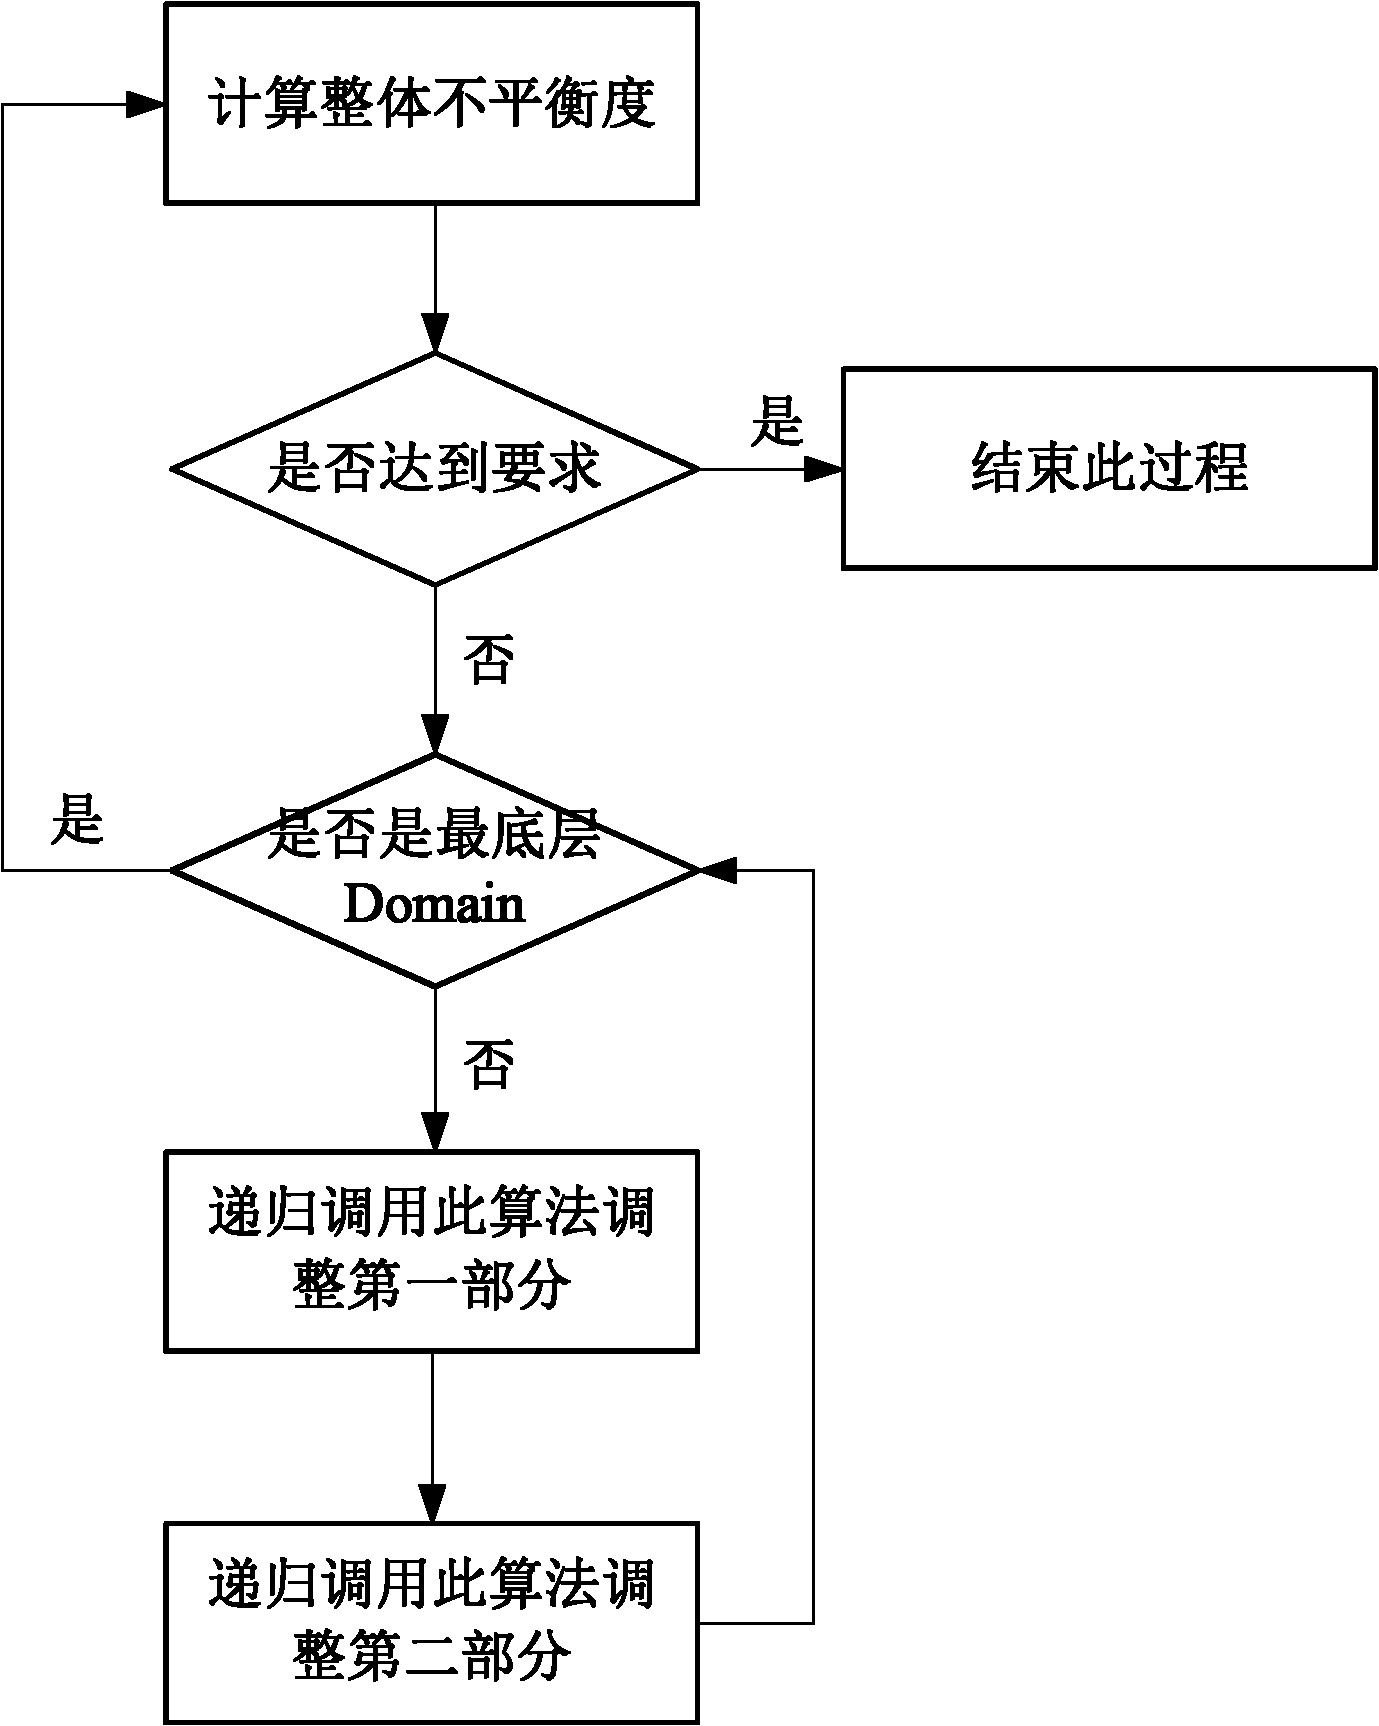 Self-adaptive load balancing method for parallelization of spatial computation